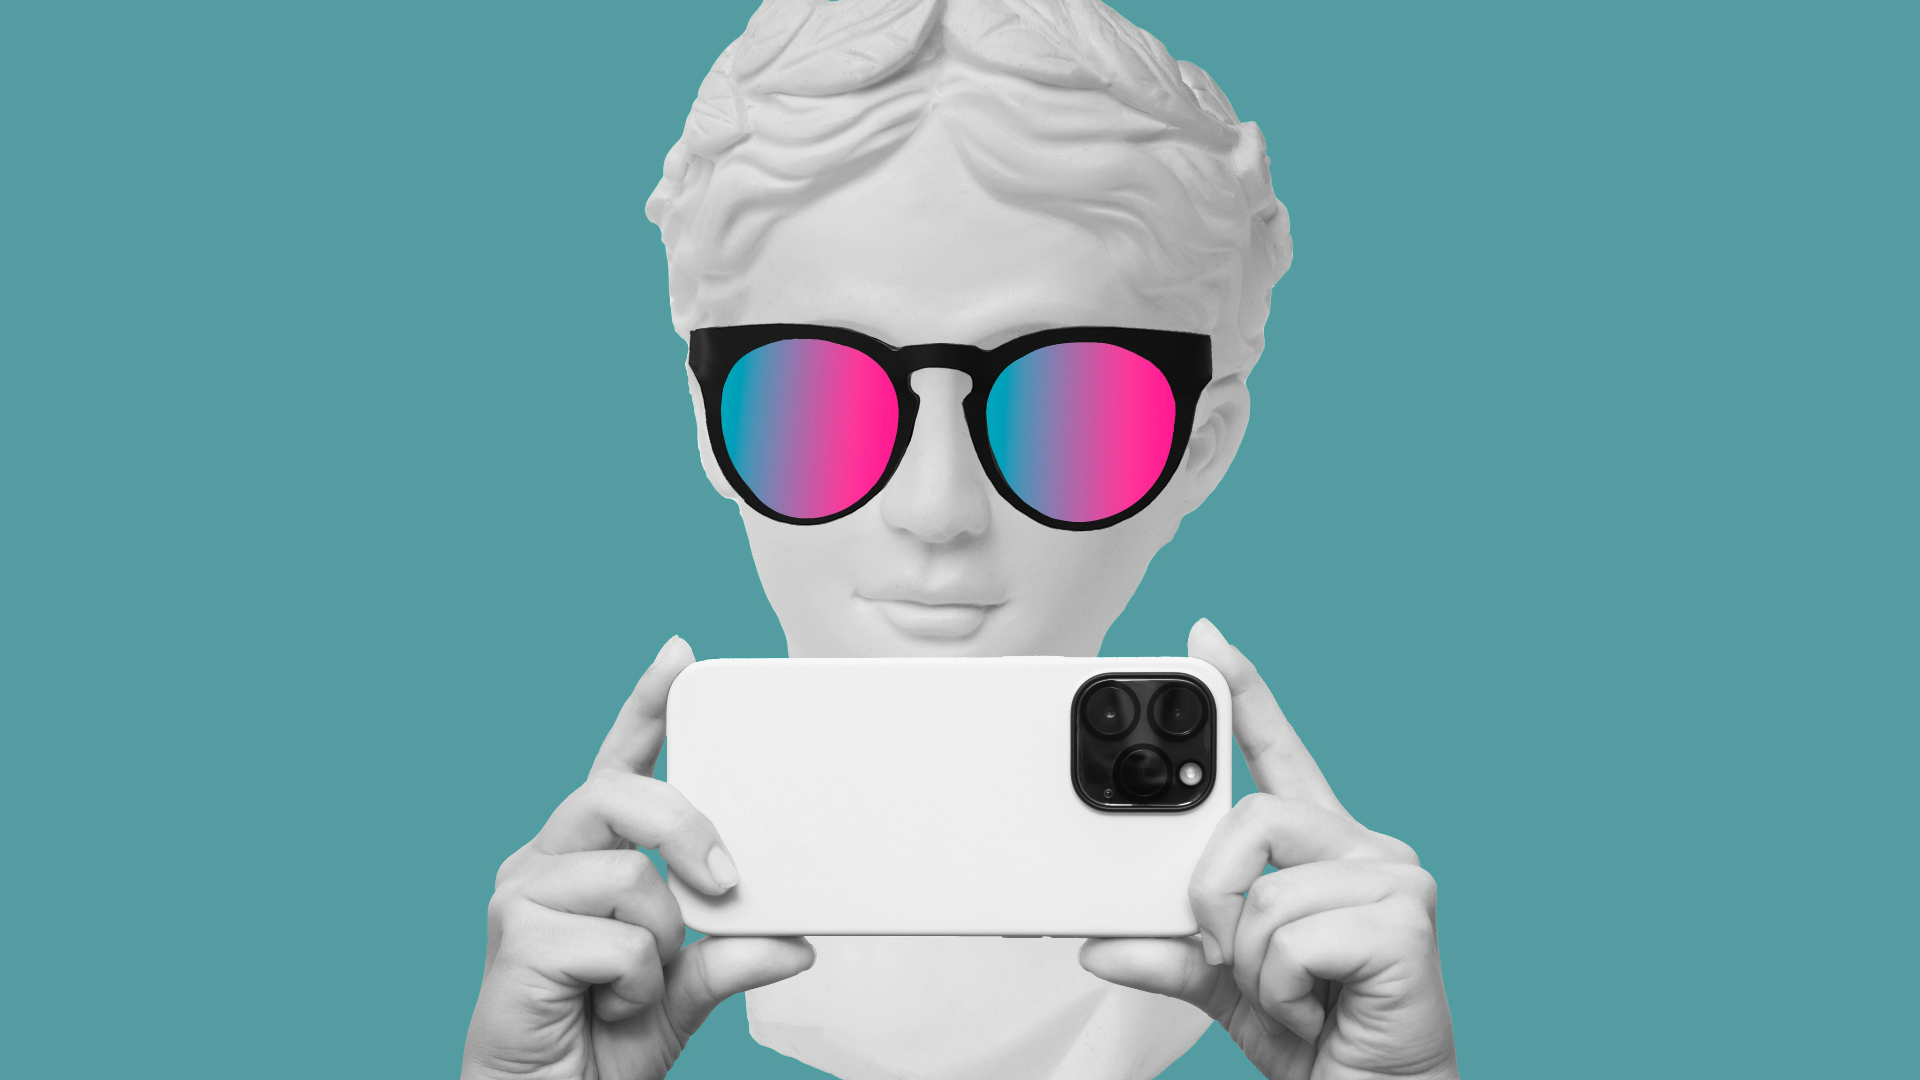 A marble statue wearing rainbow-tinted glasses holds a smartphone.